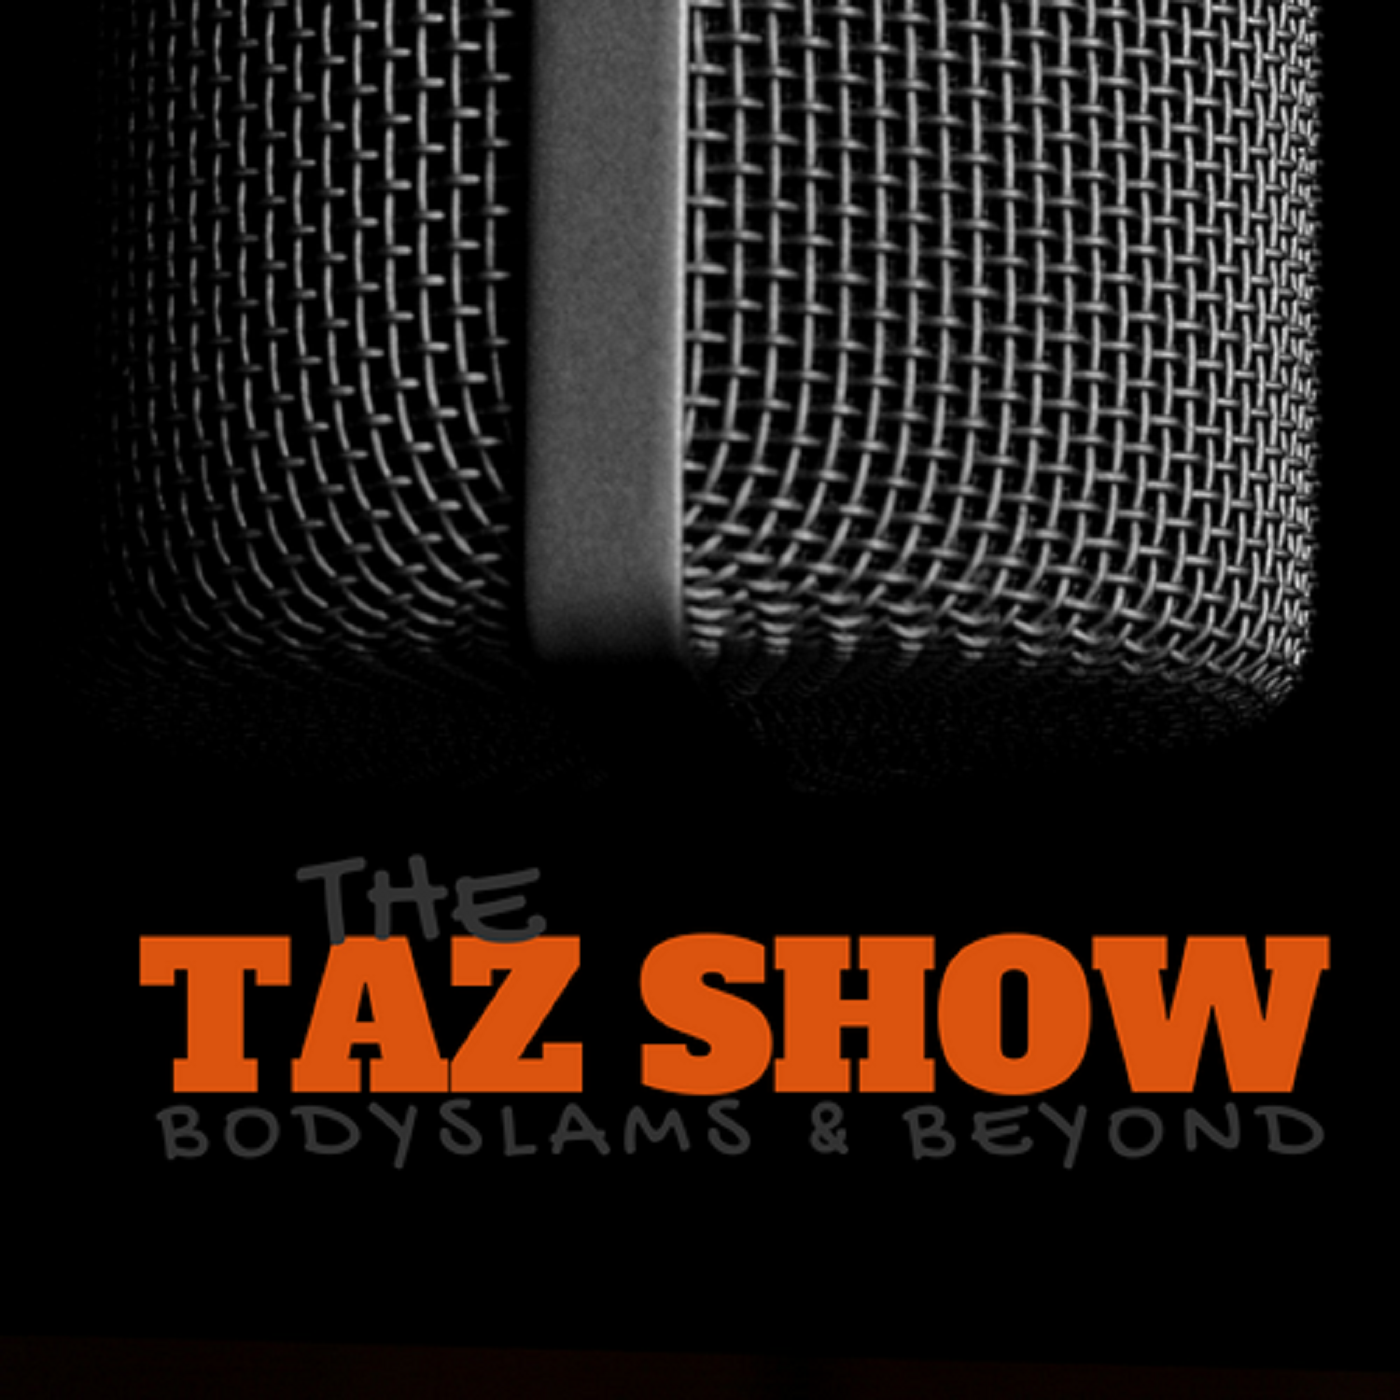 The Taz Show! First day of video!